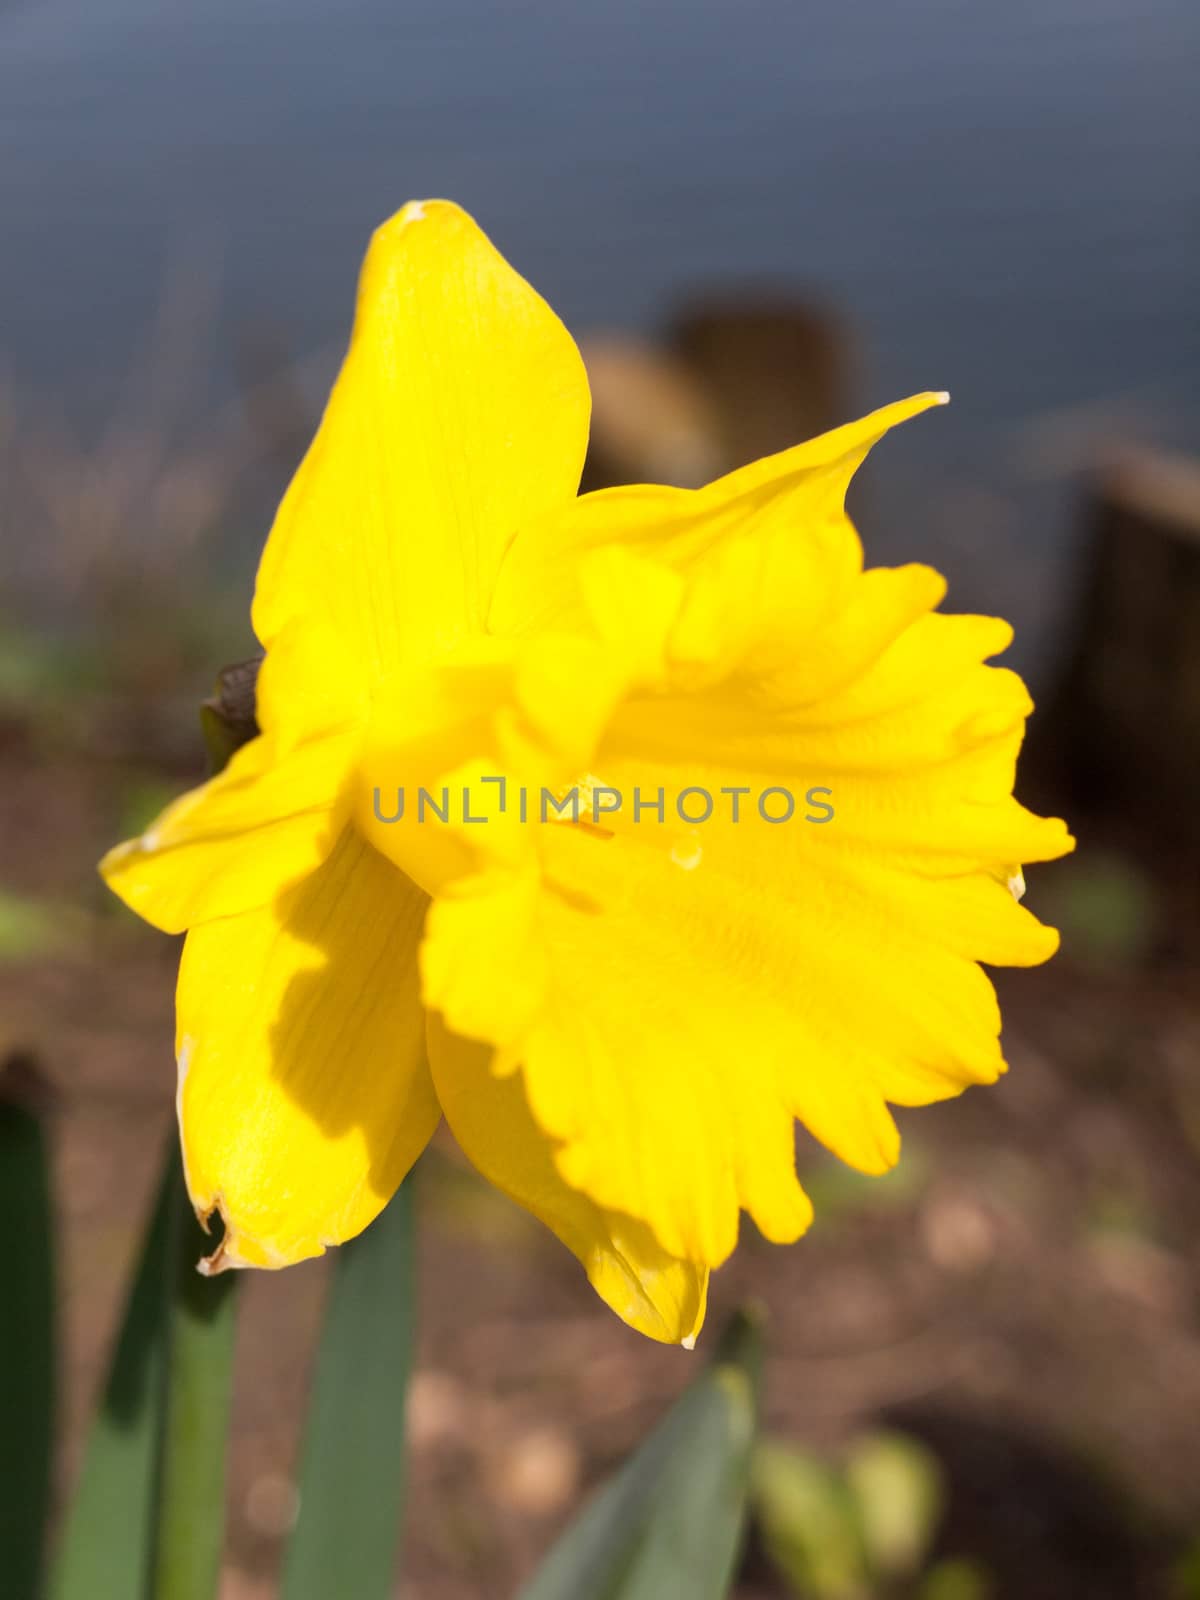 Gorgeoue Yellow Daffodils Up Close in Spring by callumrc